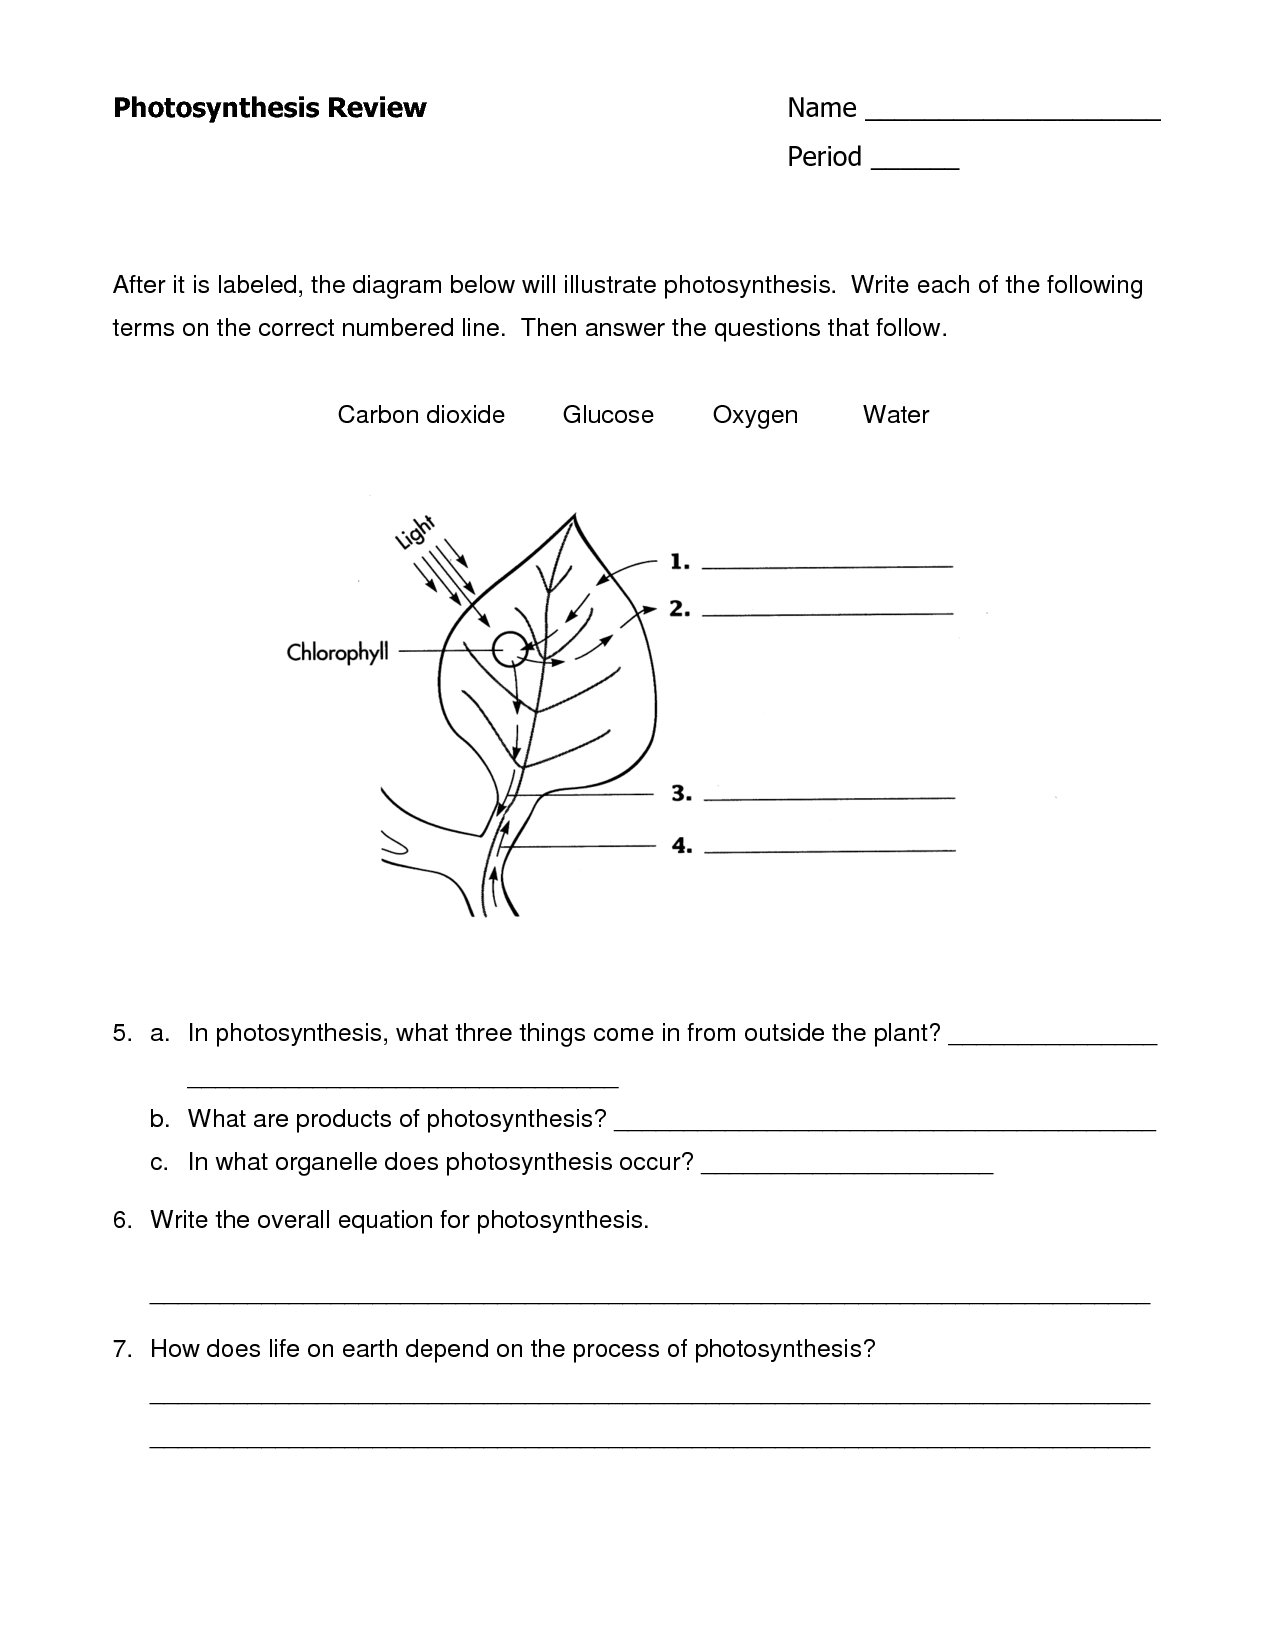 15-best-images-of-plant-photosynthesis-worksheet-photosynthesis-worksheet-answer-key